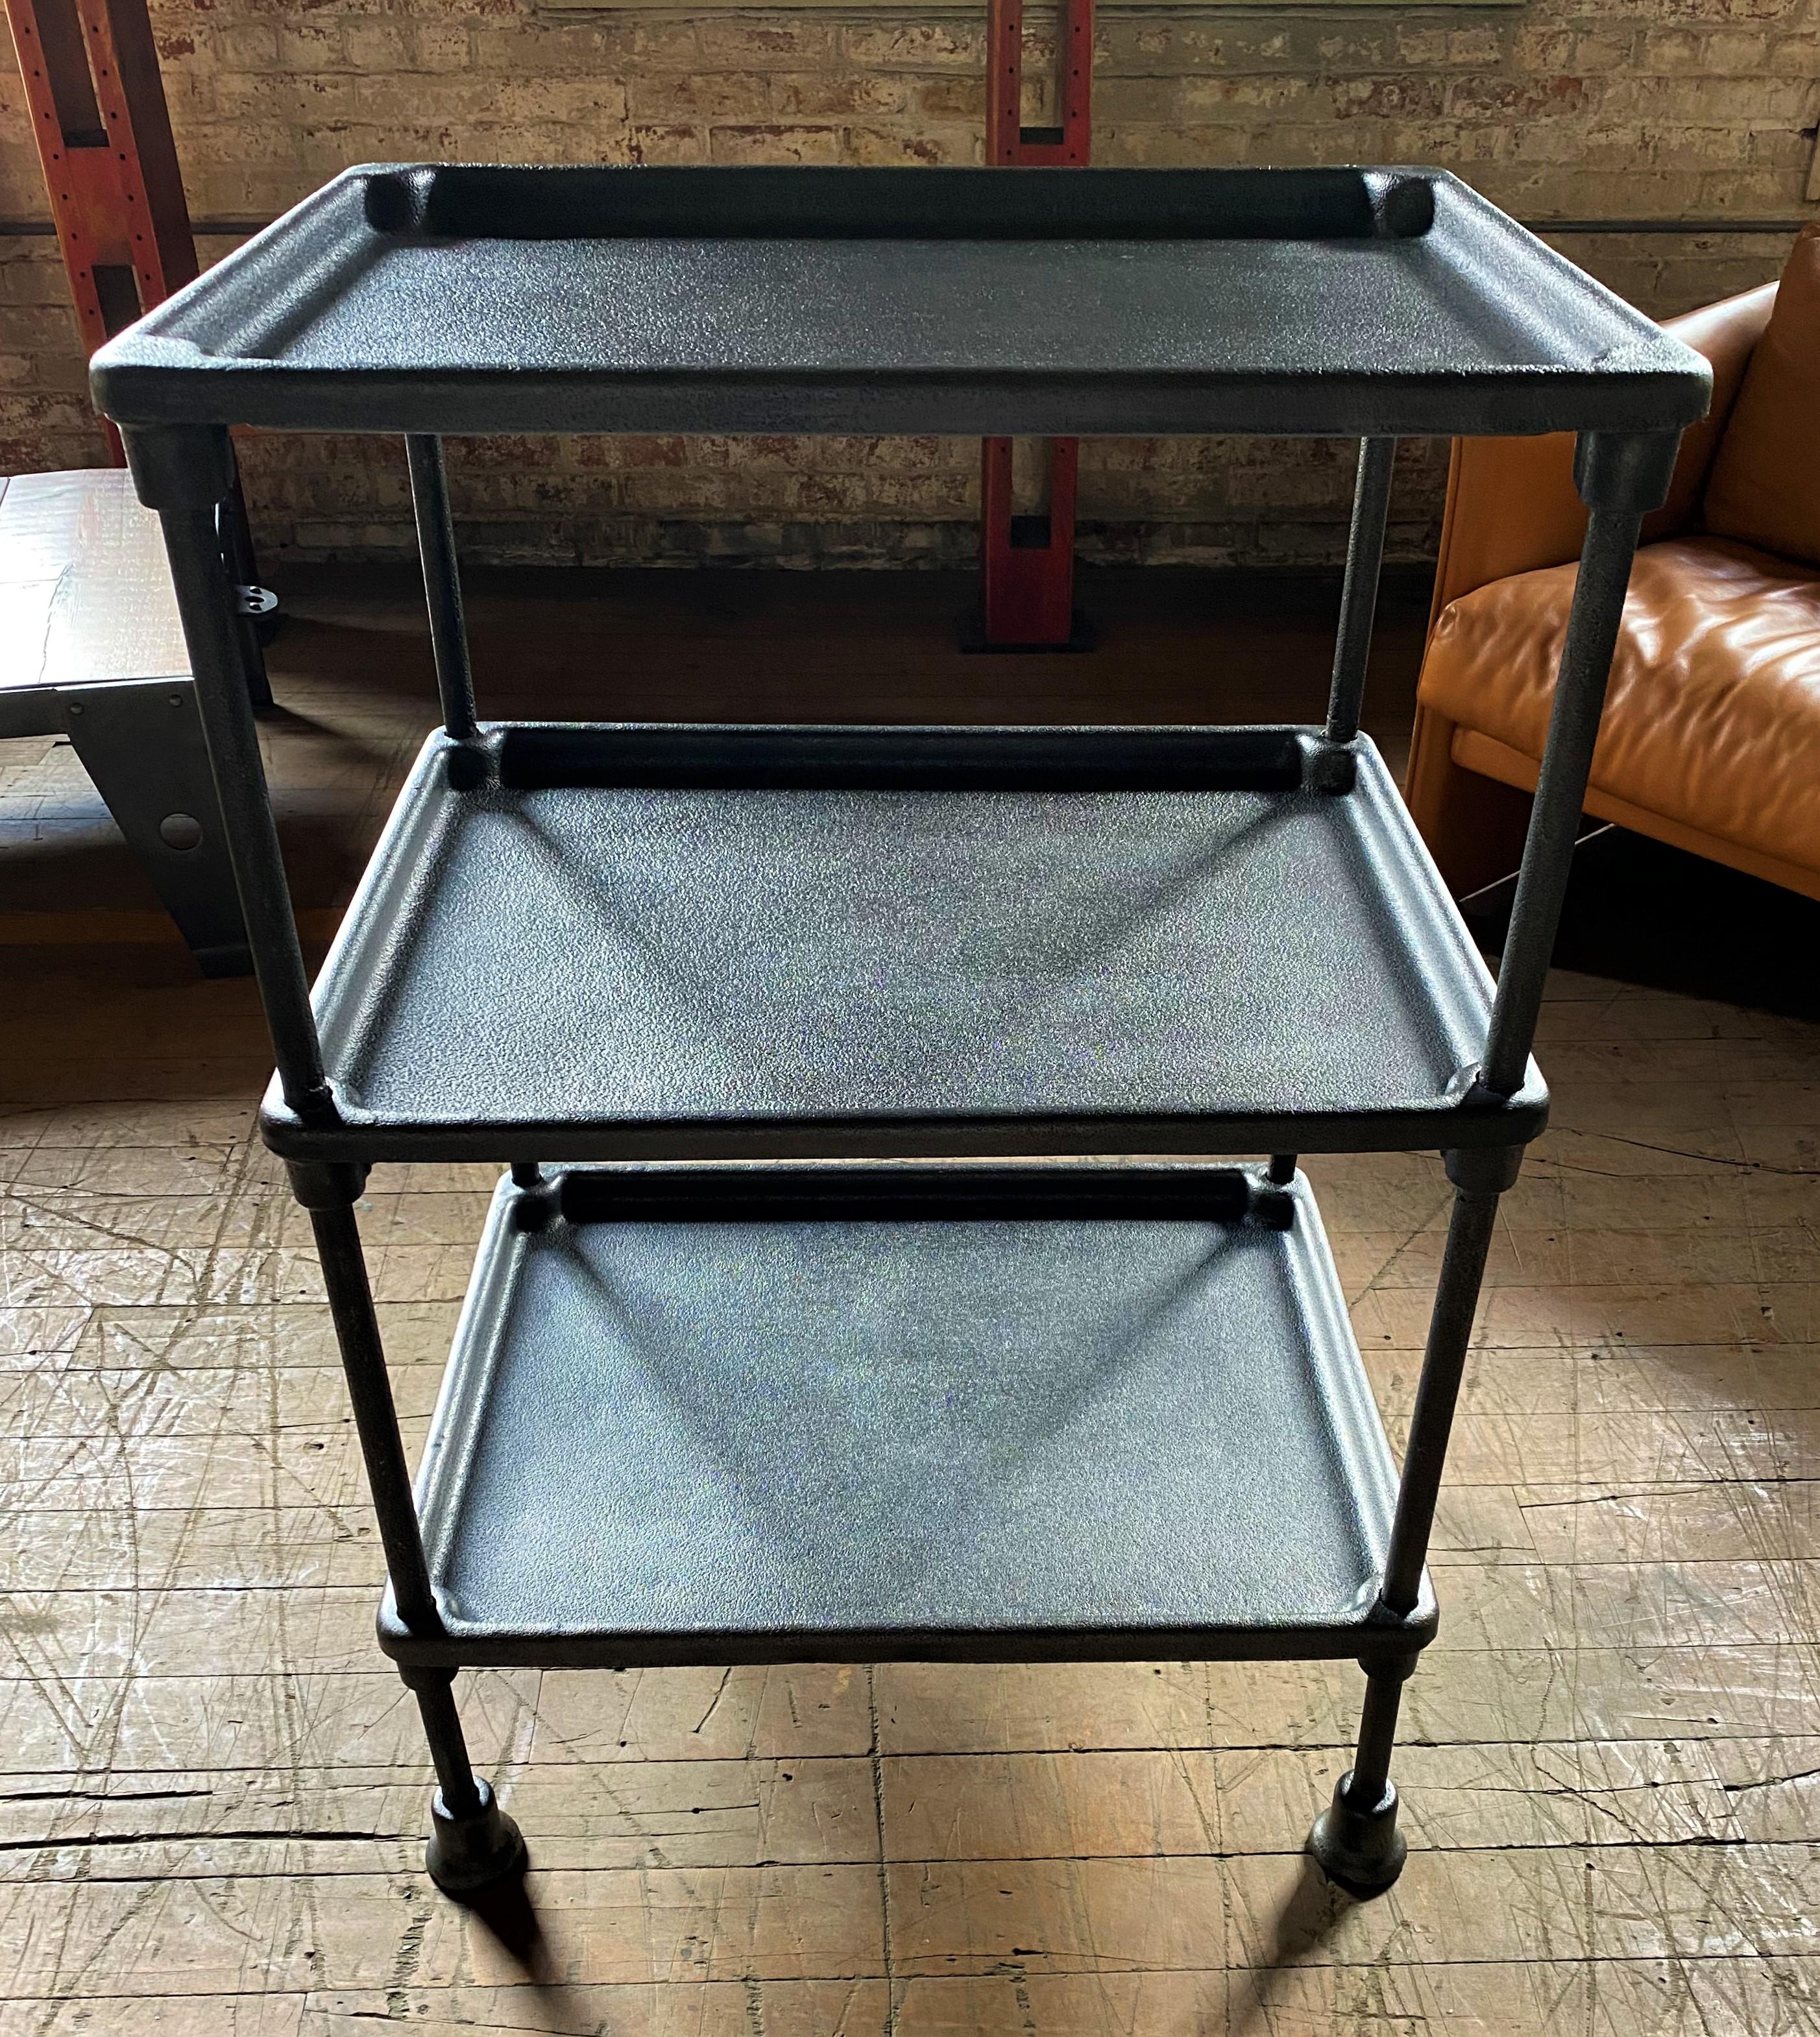 New Britain pressed steel work stand

Overall Dimensions: 20